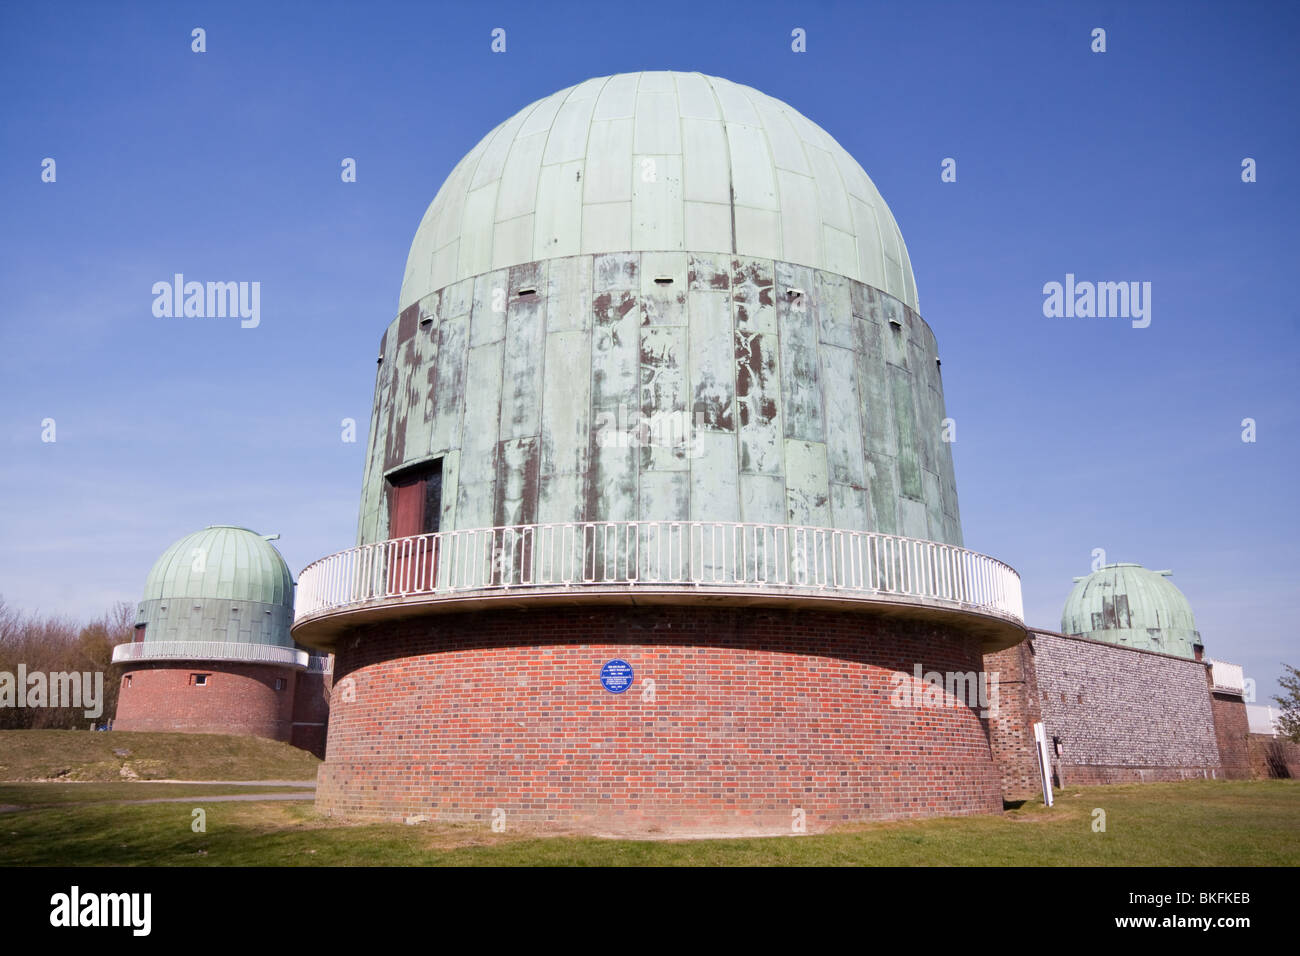 Domes at Herstmonceux Observatory, formerly part of the Royal Greenwich Observatory Stock Photo